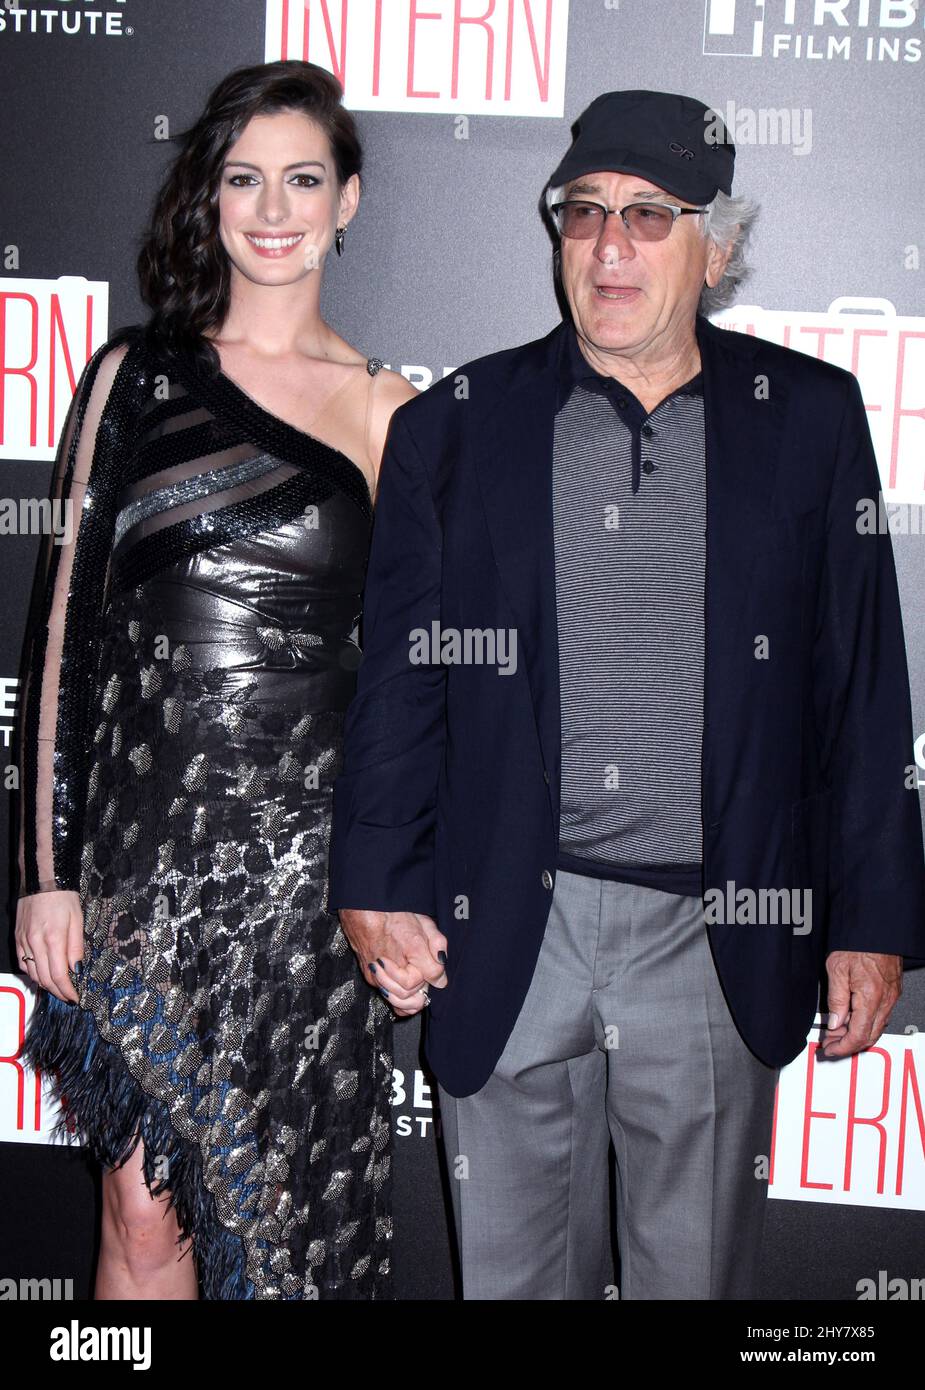 Anne Hathaway And Robert De Niro Attends The Intern World Premiere Held At The Ziegfeld Theatre On September 21 2015 2HY7X85 